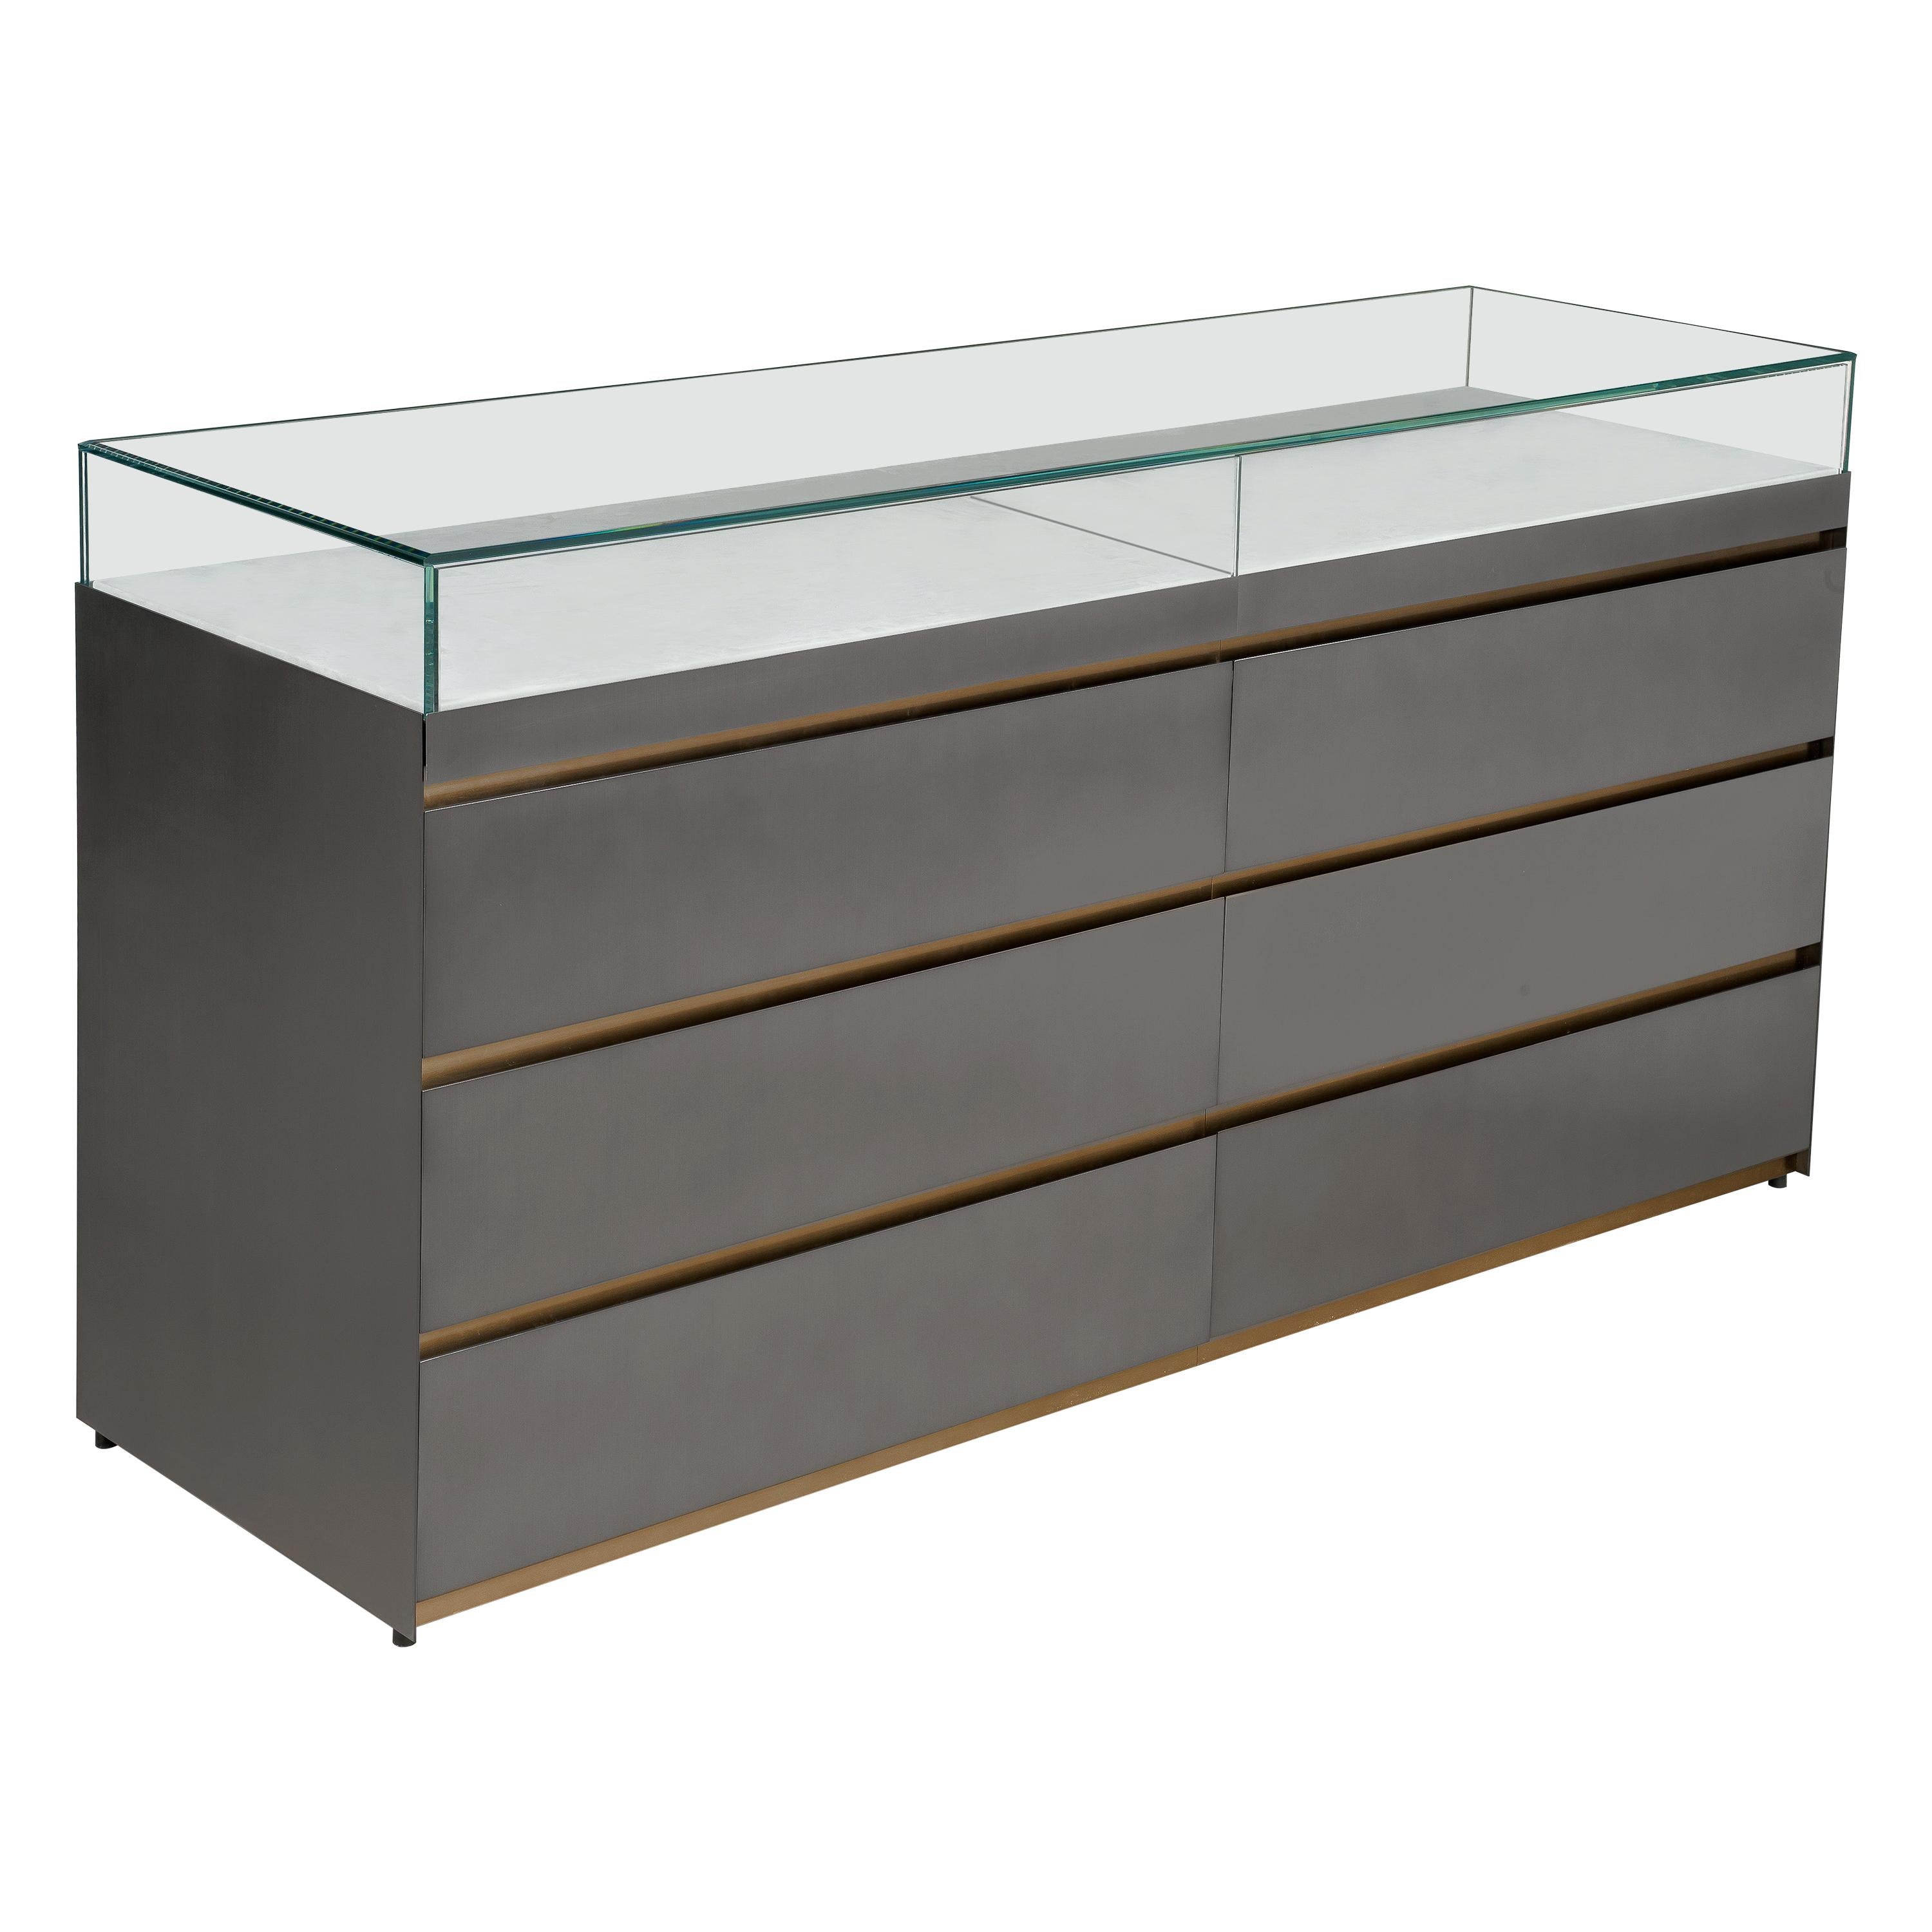 Loose, Drawers Showcases with Metal Structure